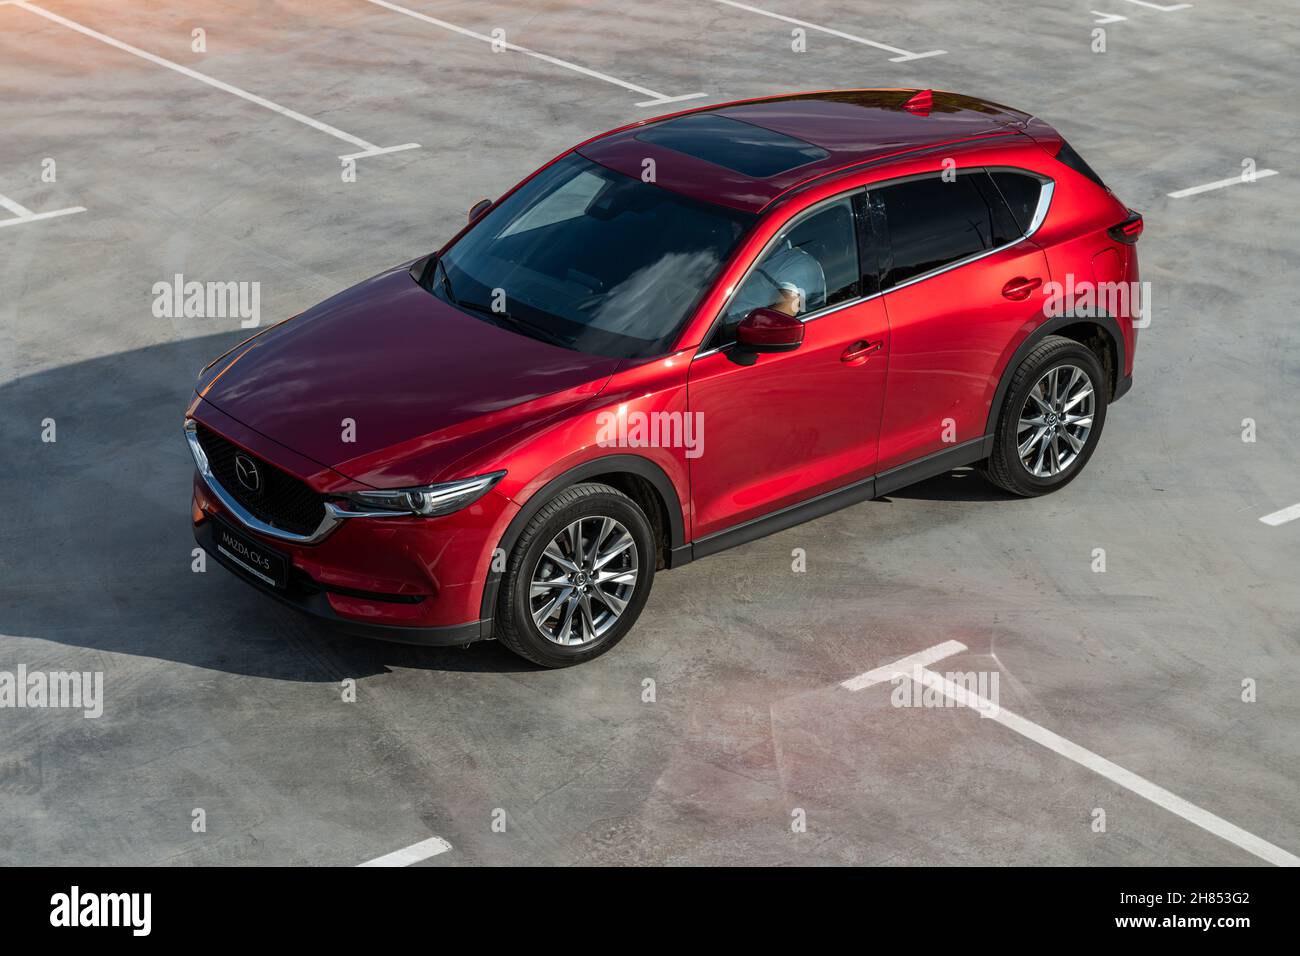 Kyiv, Ukraine - June 30, 2021: Red Mazda CX-5 at parking lot in the city Stock Photo